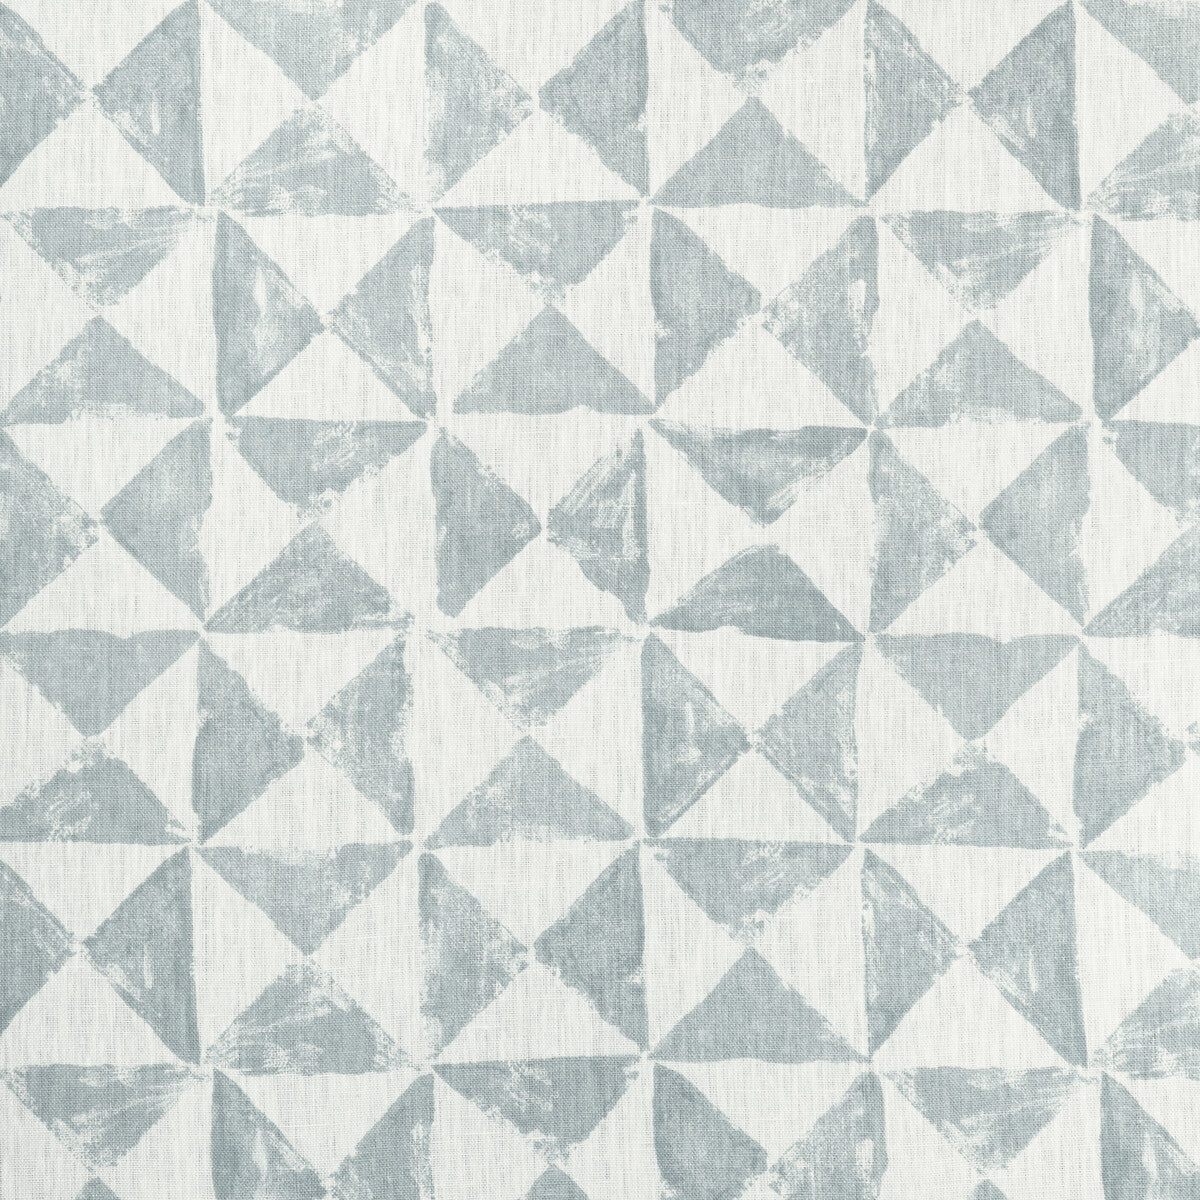 Triquad fabric in silver color - pattern TRIQUAD.11.0 - by Kravet Basics in the Small Scale Prints collection